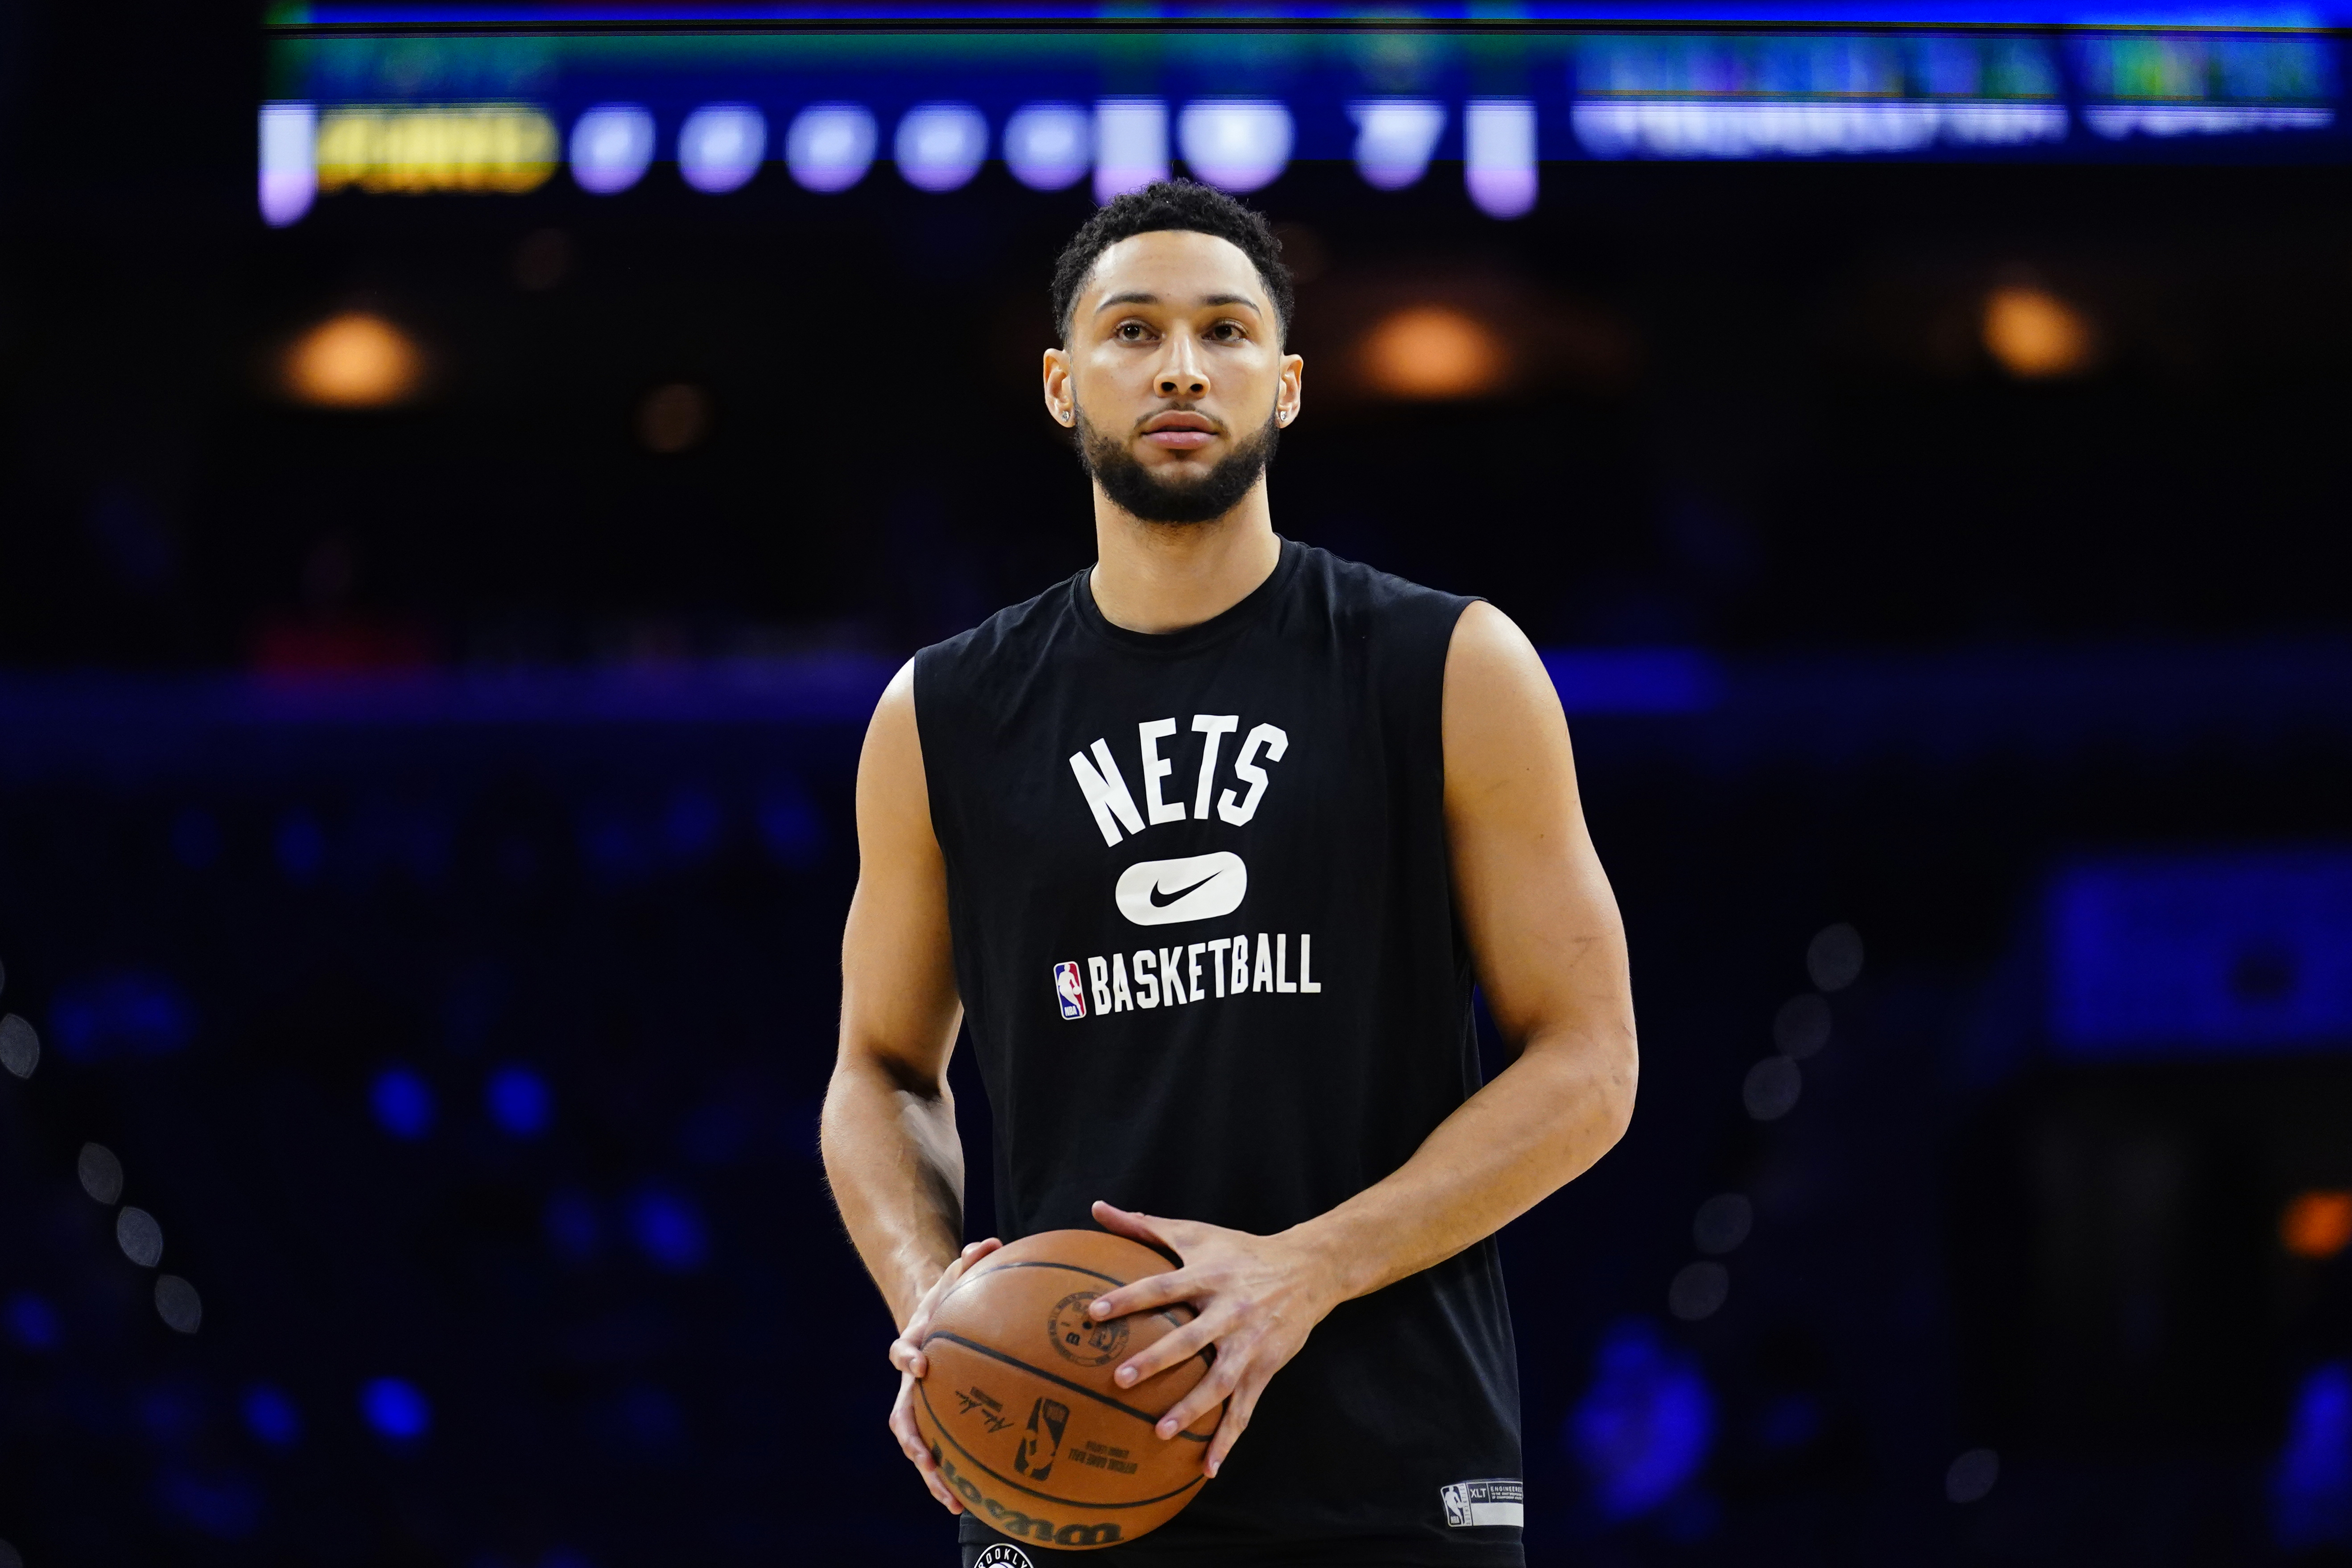 Ben Simmons is so fast, but can speed save him? 